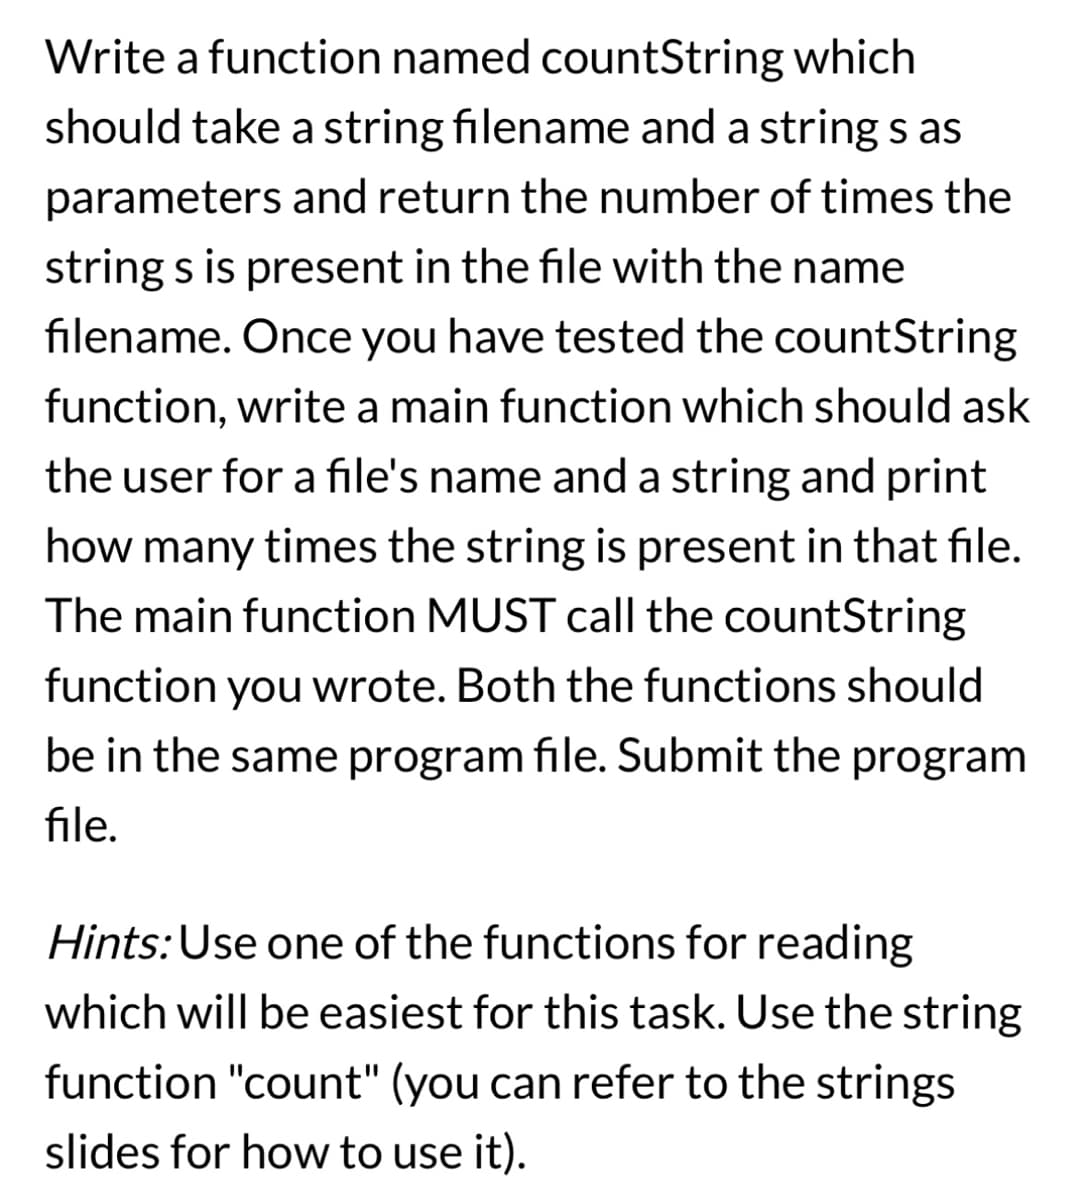 Write a function named countString which
should take a string filename and a string s as
parameters and return the number of times the
string s is present in the file with the name
filename. Once you have tested the countString
function, write a main function which should ask
the user for a file's name and a string and print
how many times the string is present in that file.
The main function MUST call the countString
function you wrote. Both the functions should
be in the same program file. Submit the program
file.
Hints: Use one of the functions for reading
which will be easiest for this task. Use the string
function "count" (you can refer to the strings
slides for how to use it).